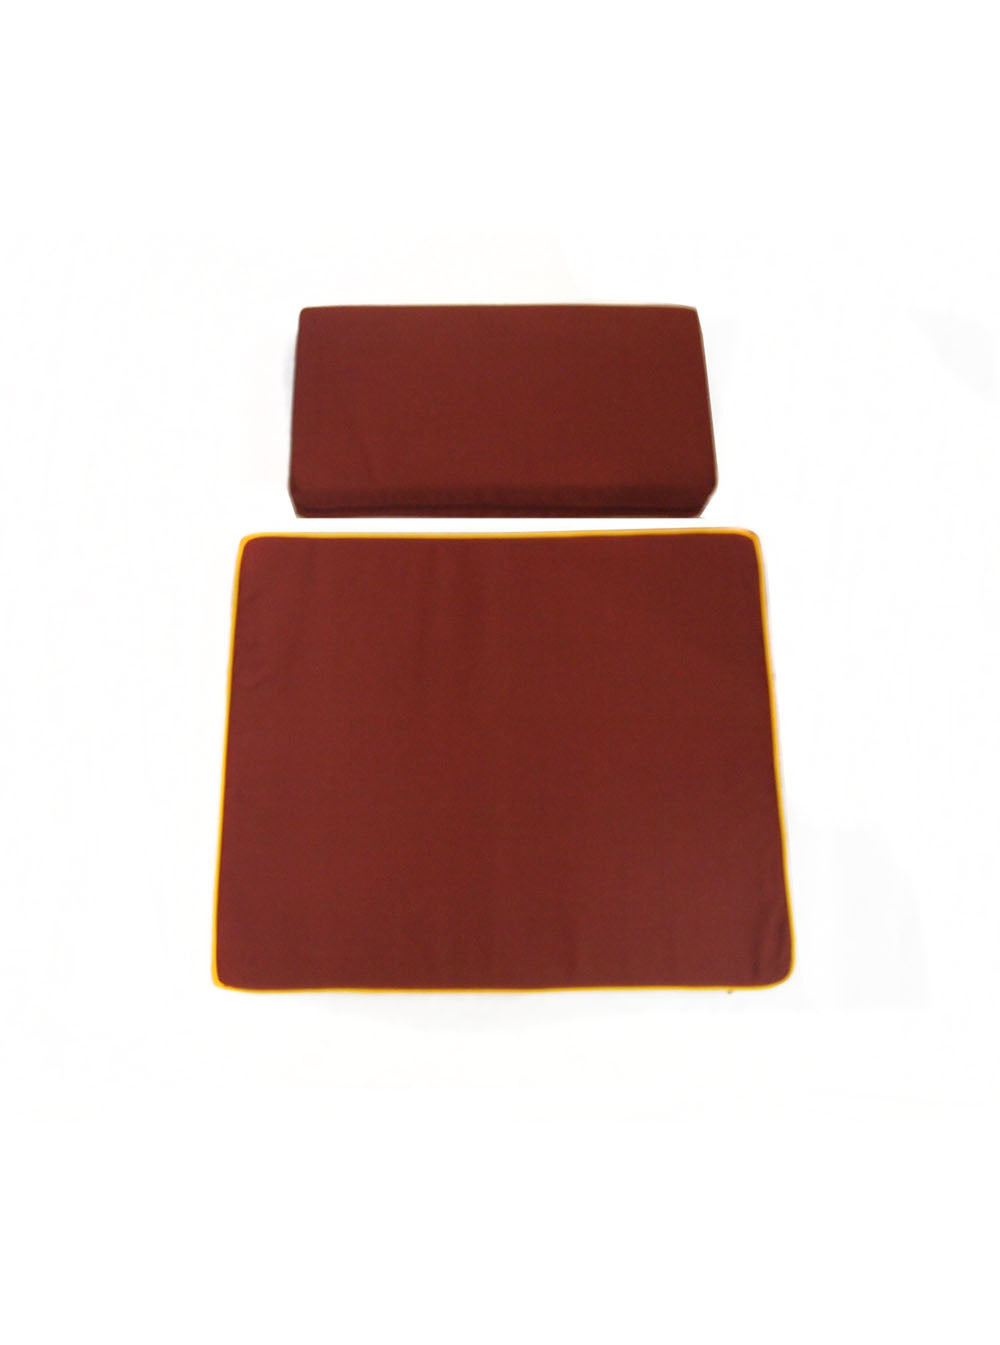 2-Pieces Large Meditation Cushion in Reddish Brown